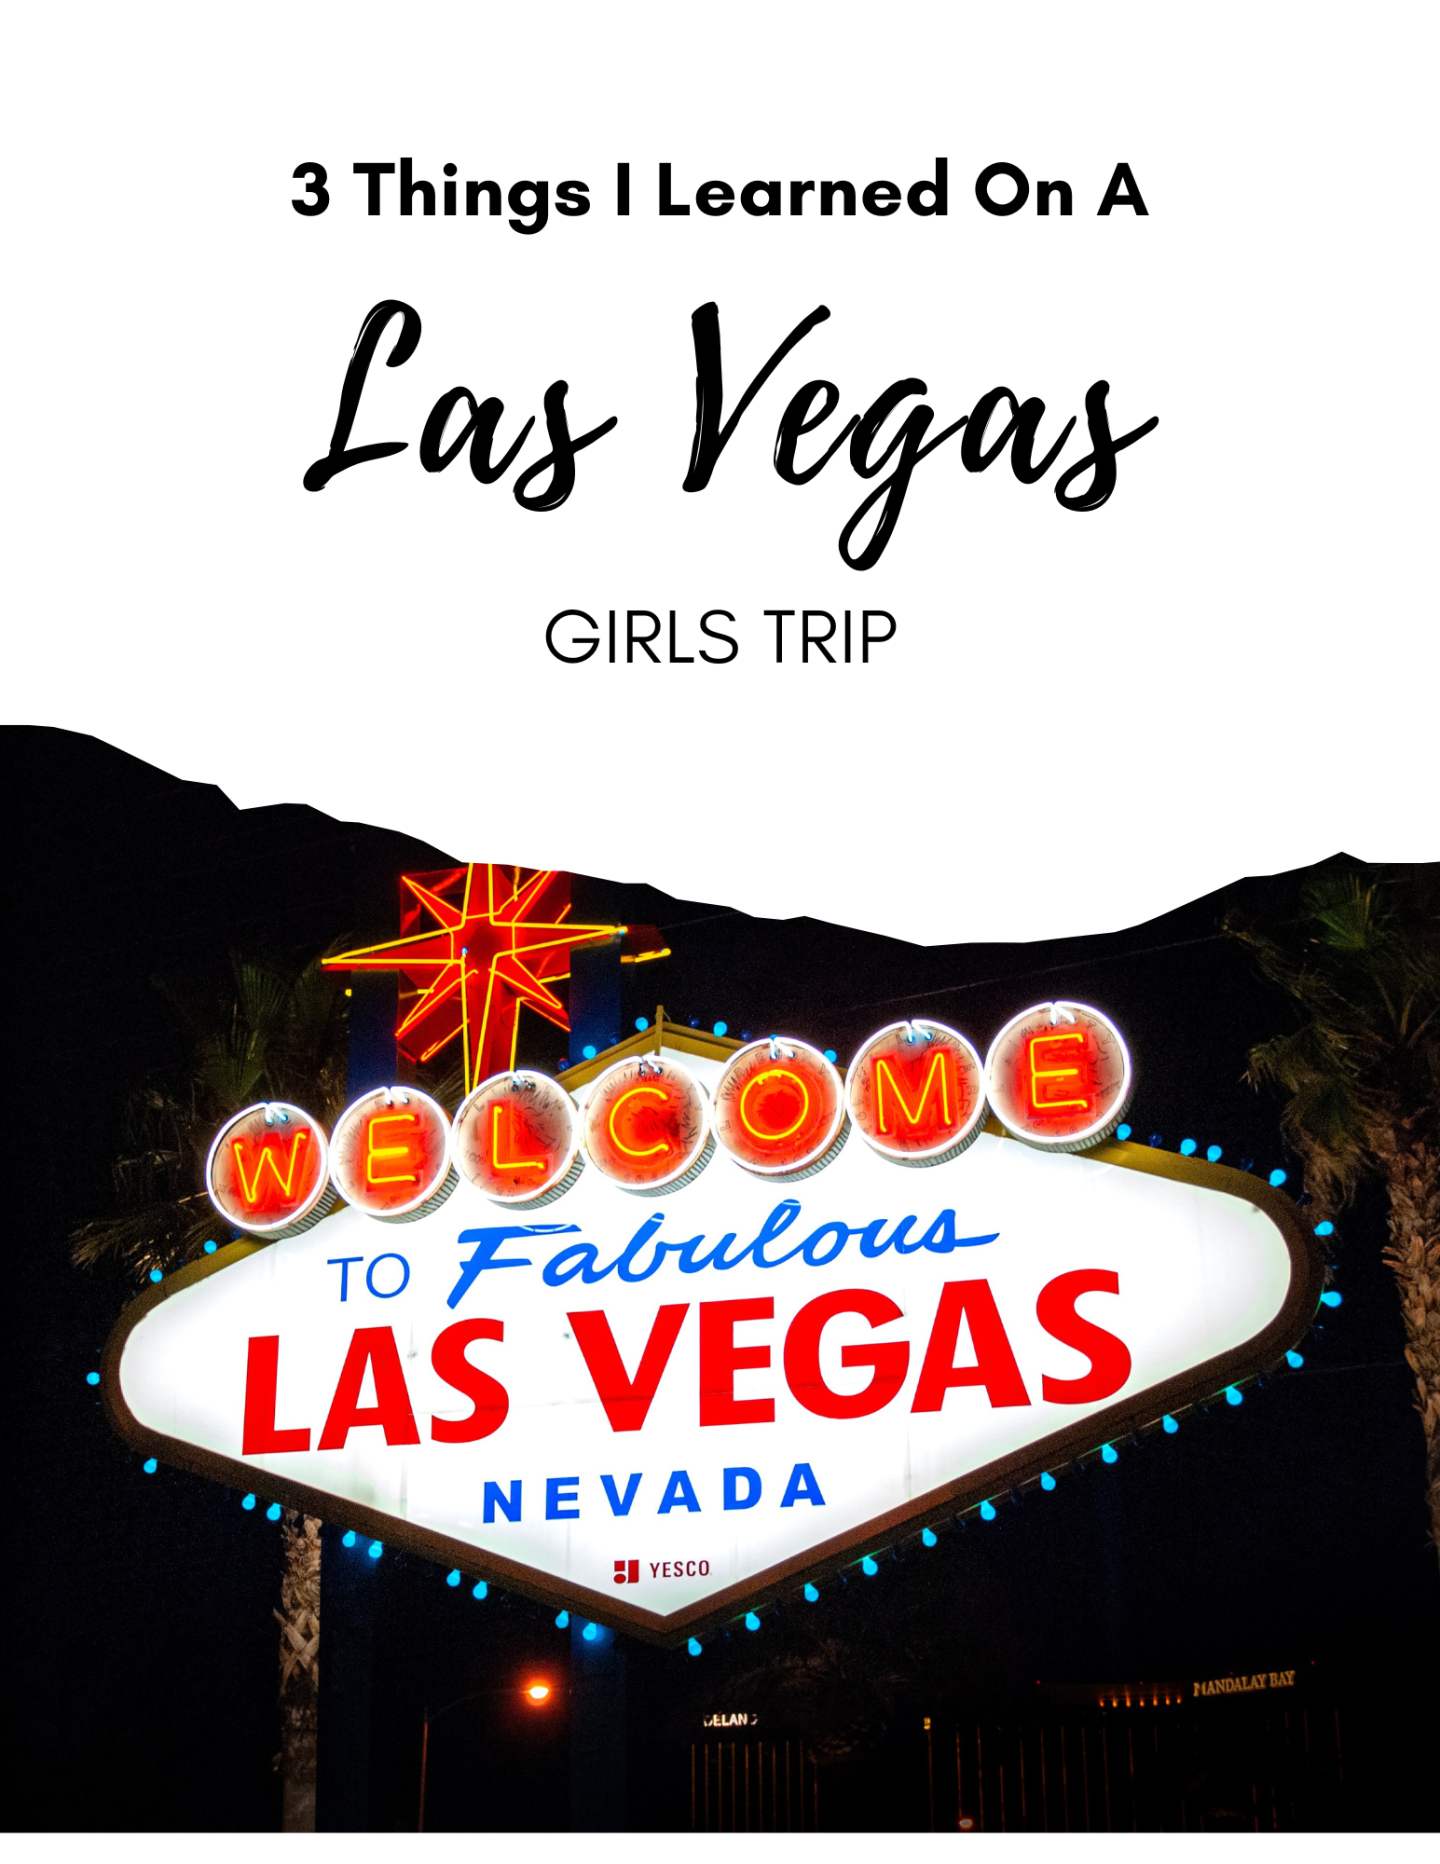 3 Things I Learned On A Las Vegas Girls Trip | Finding Mandee